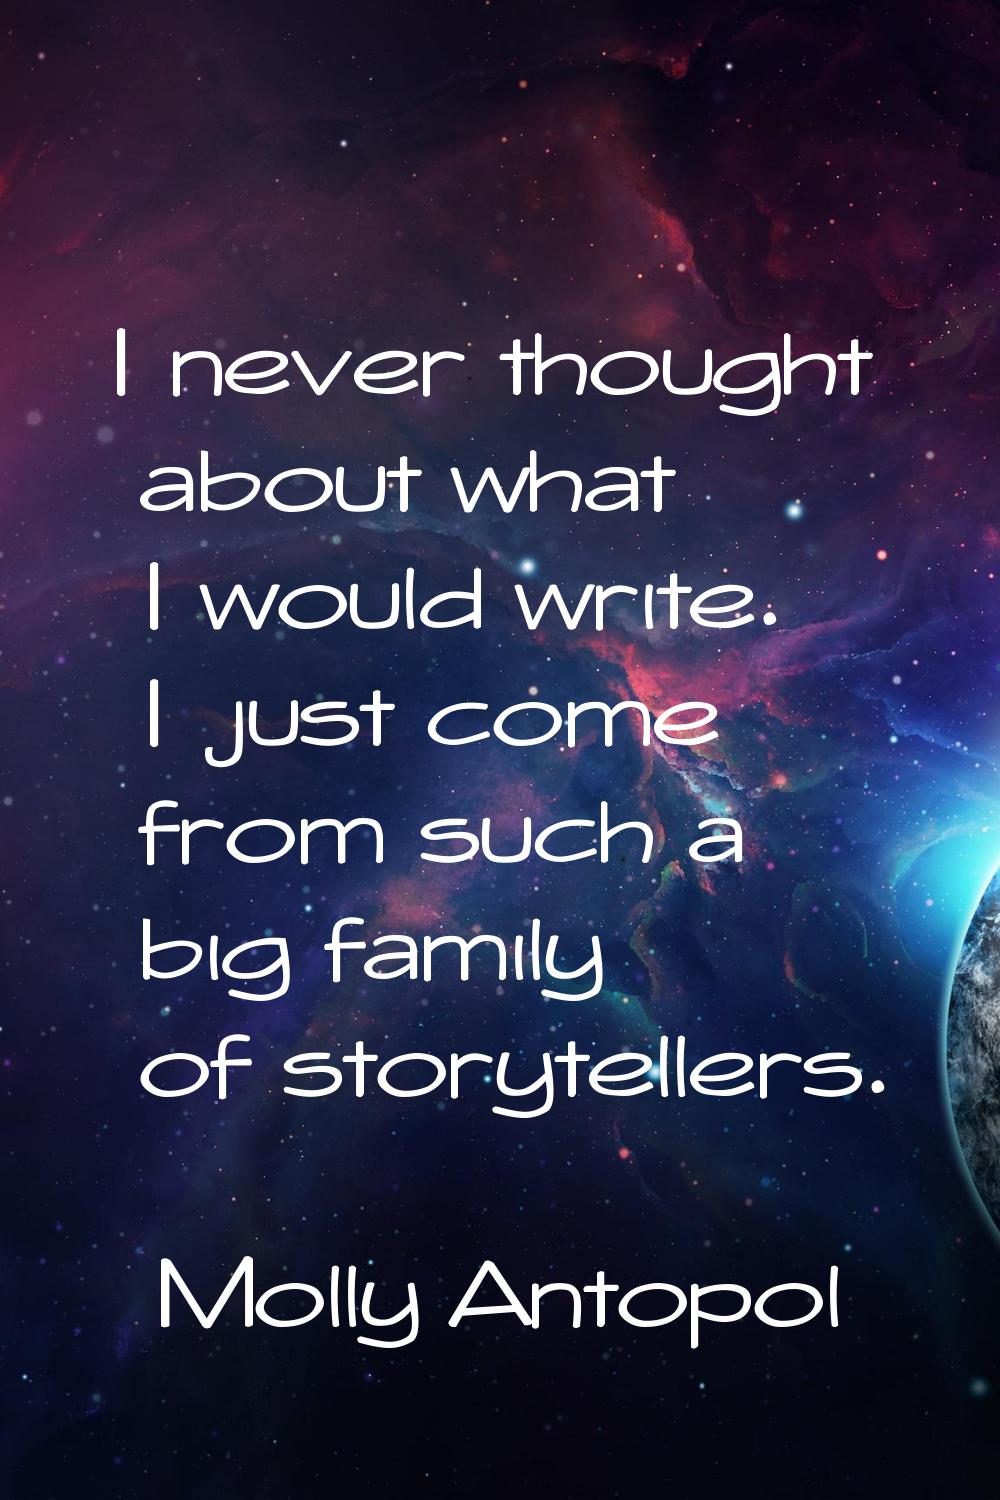 I never thought about what I would write. I just come from such a big family of storytellers.